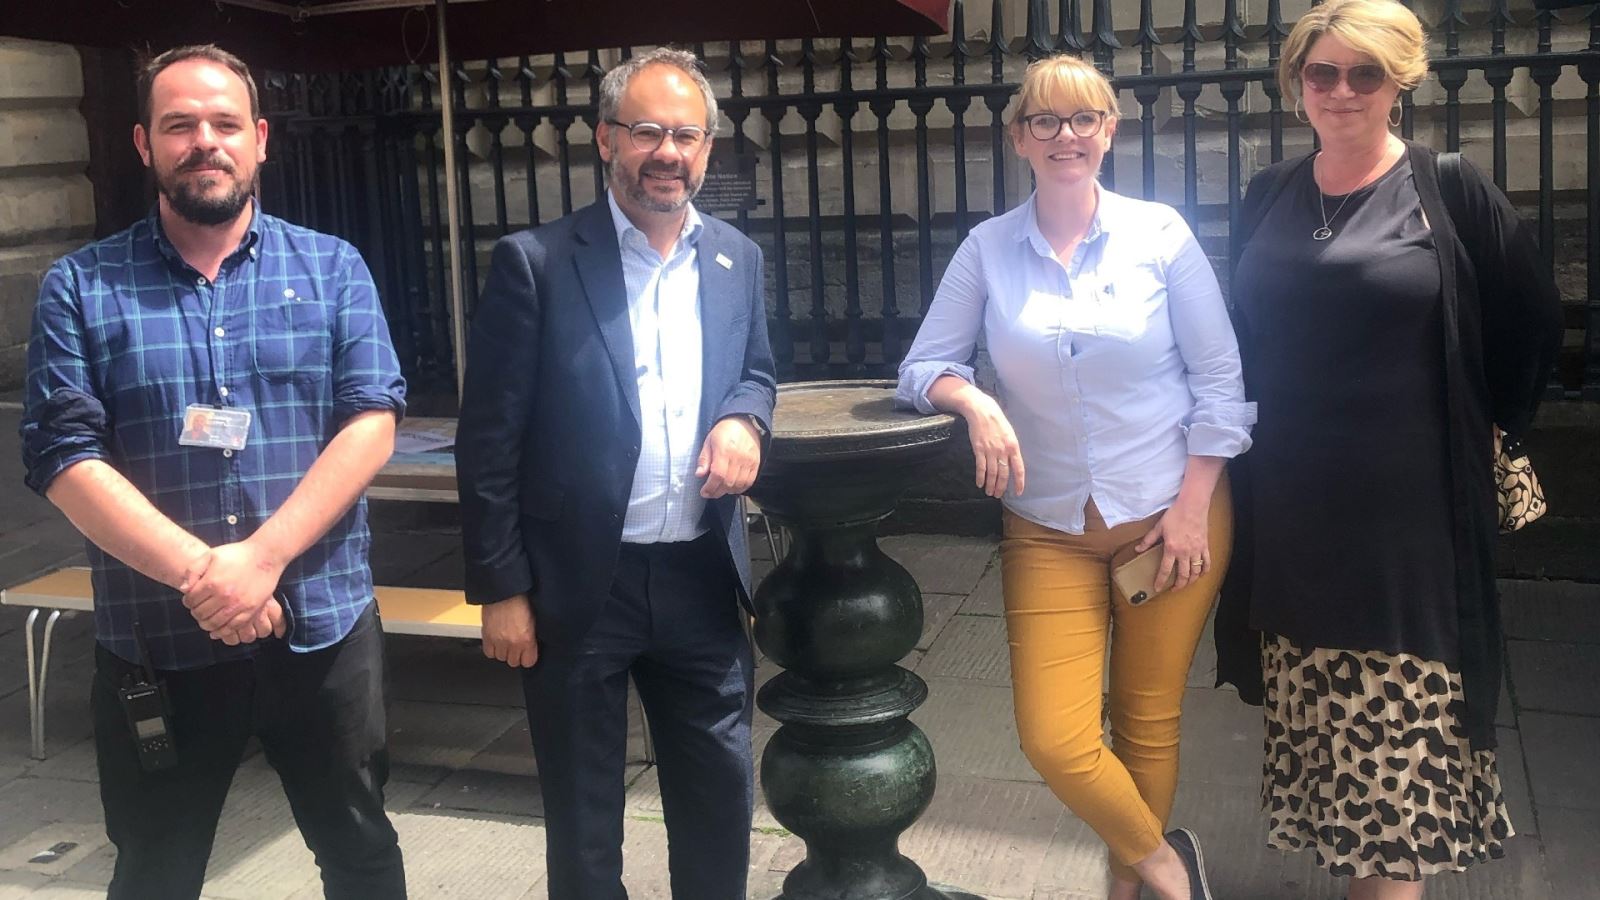 Cameron Cheek, Bristol City Council’s Markets and Estates Operations Manager,   Paul Scully, Minister for Small Business, Councillor Nicola Beech, Cabinet Member with responsibility for Strategic Planning, Resilience and Floods, and Kathryn Davis, Visit West’s Director of Tourism